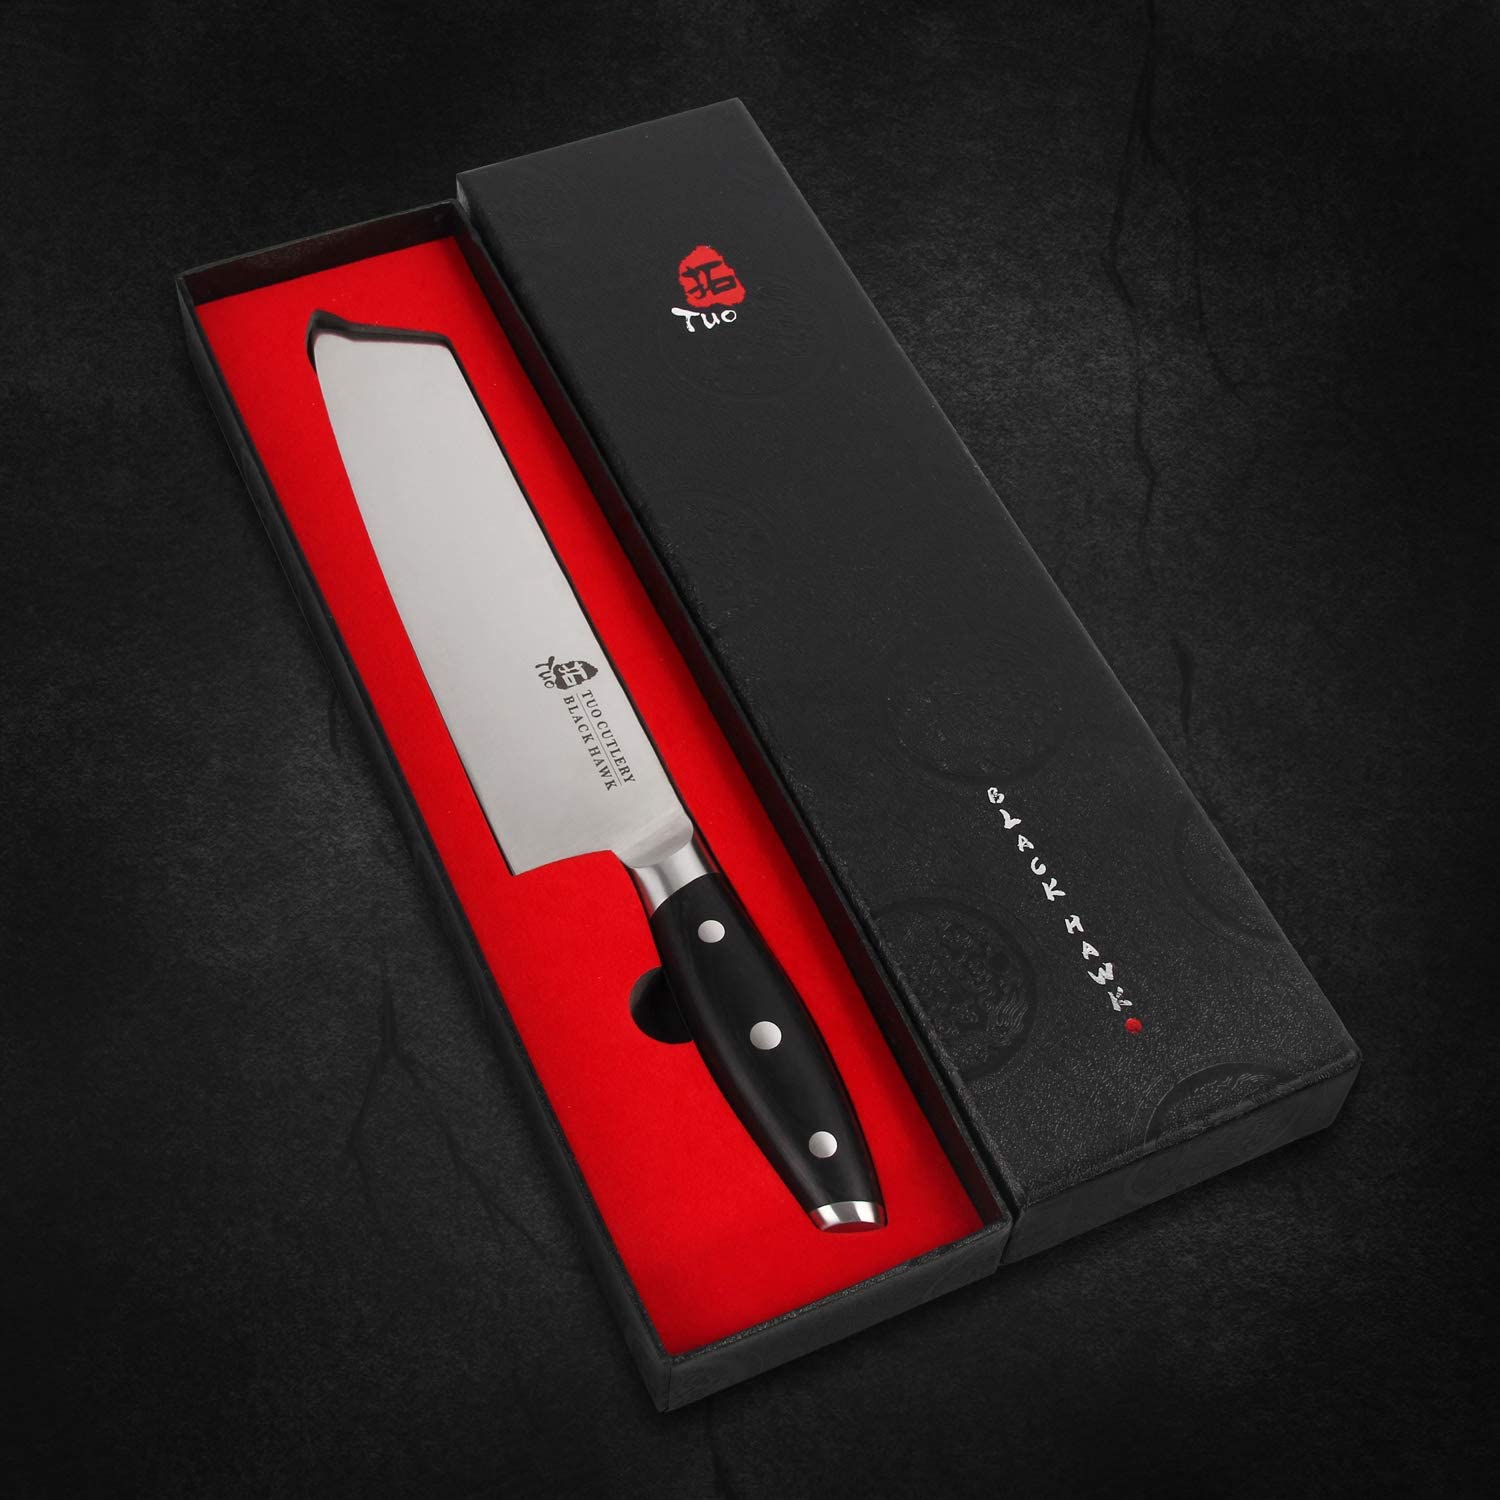 Global Knives 8 Chef's Knife — KitchenKapers